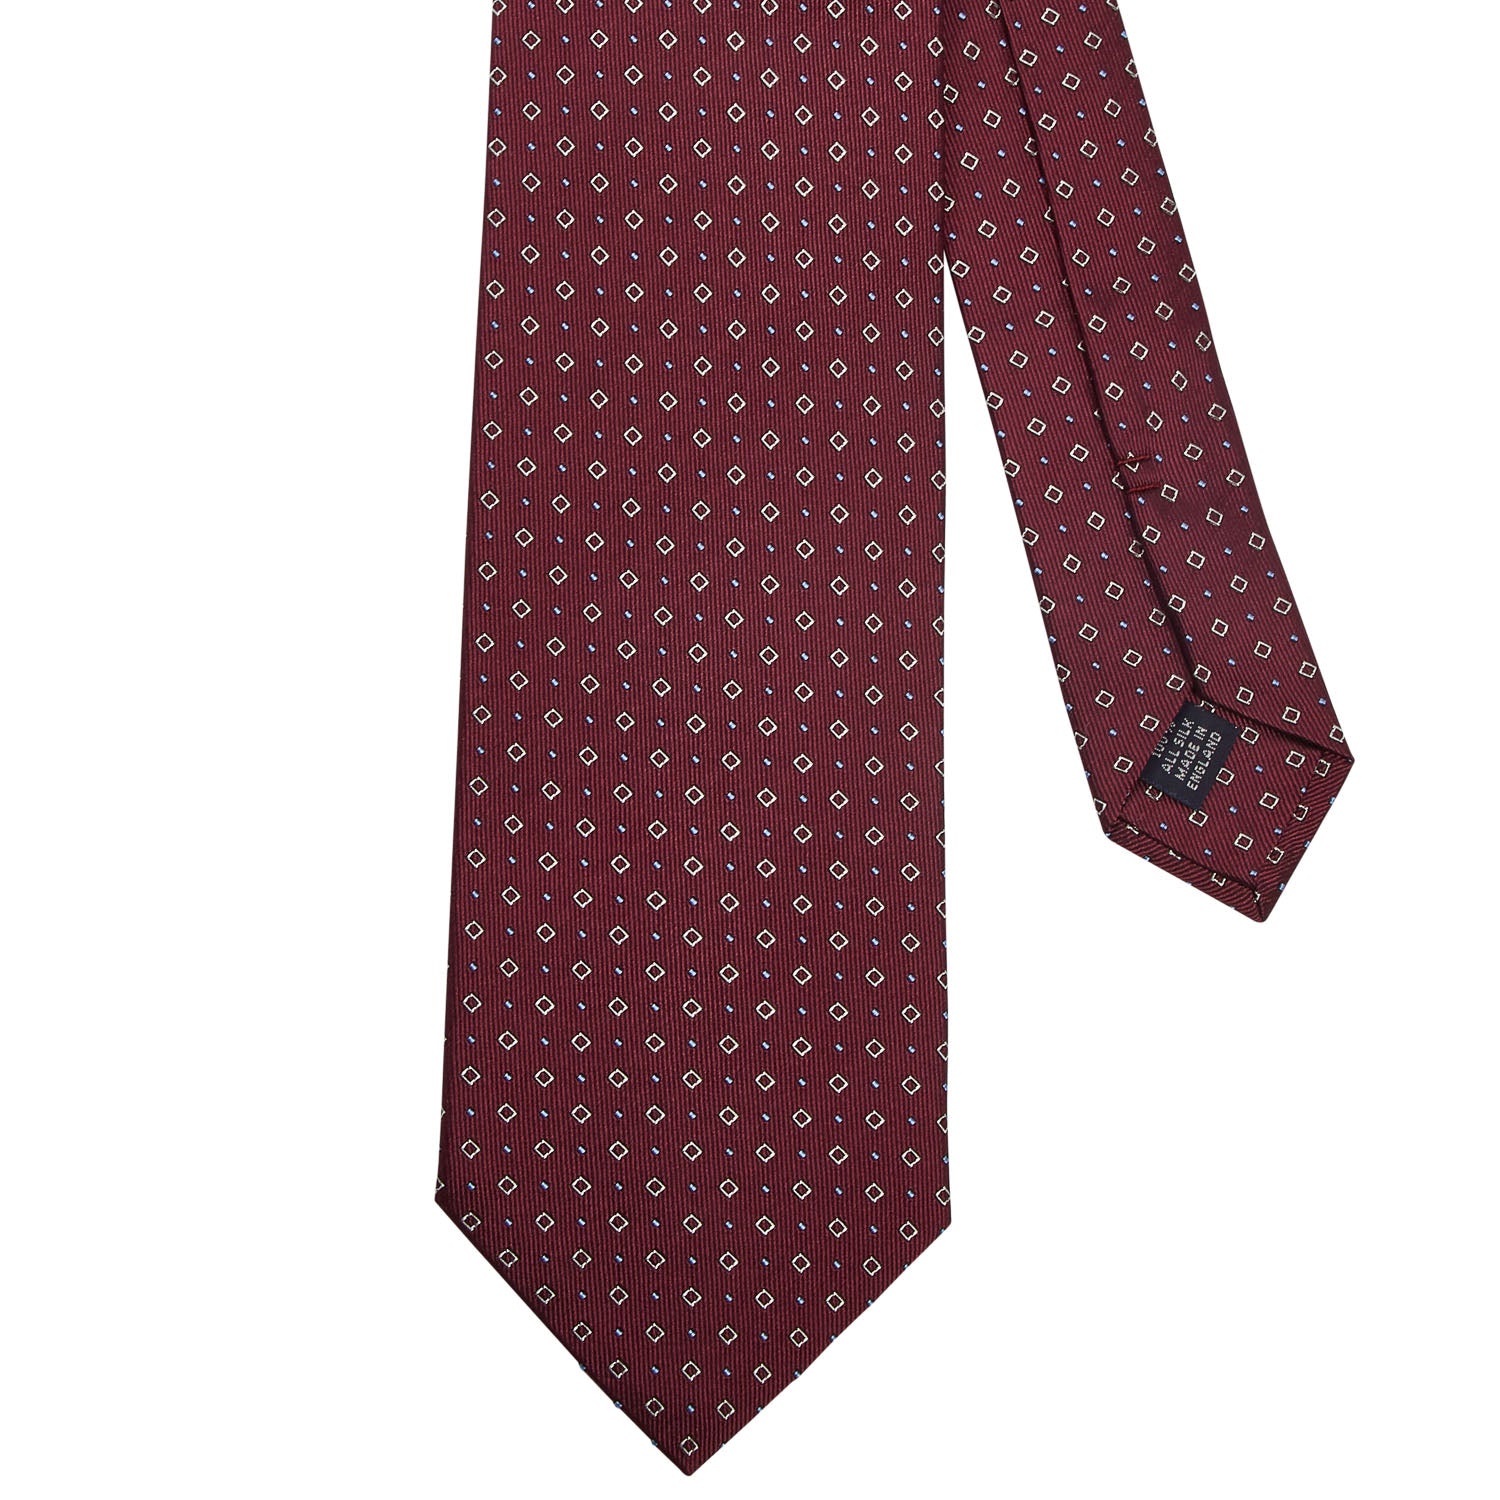 A Sovereign Grade Oxblood Alternating Square Dot Jacquard Tie, crafted by KirbyAllison.com in the United Kingdom.